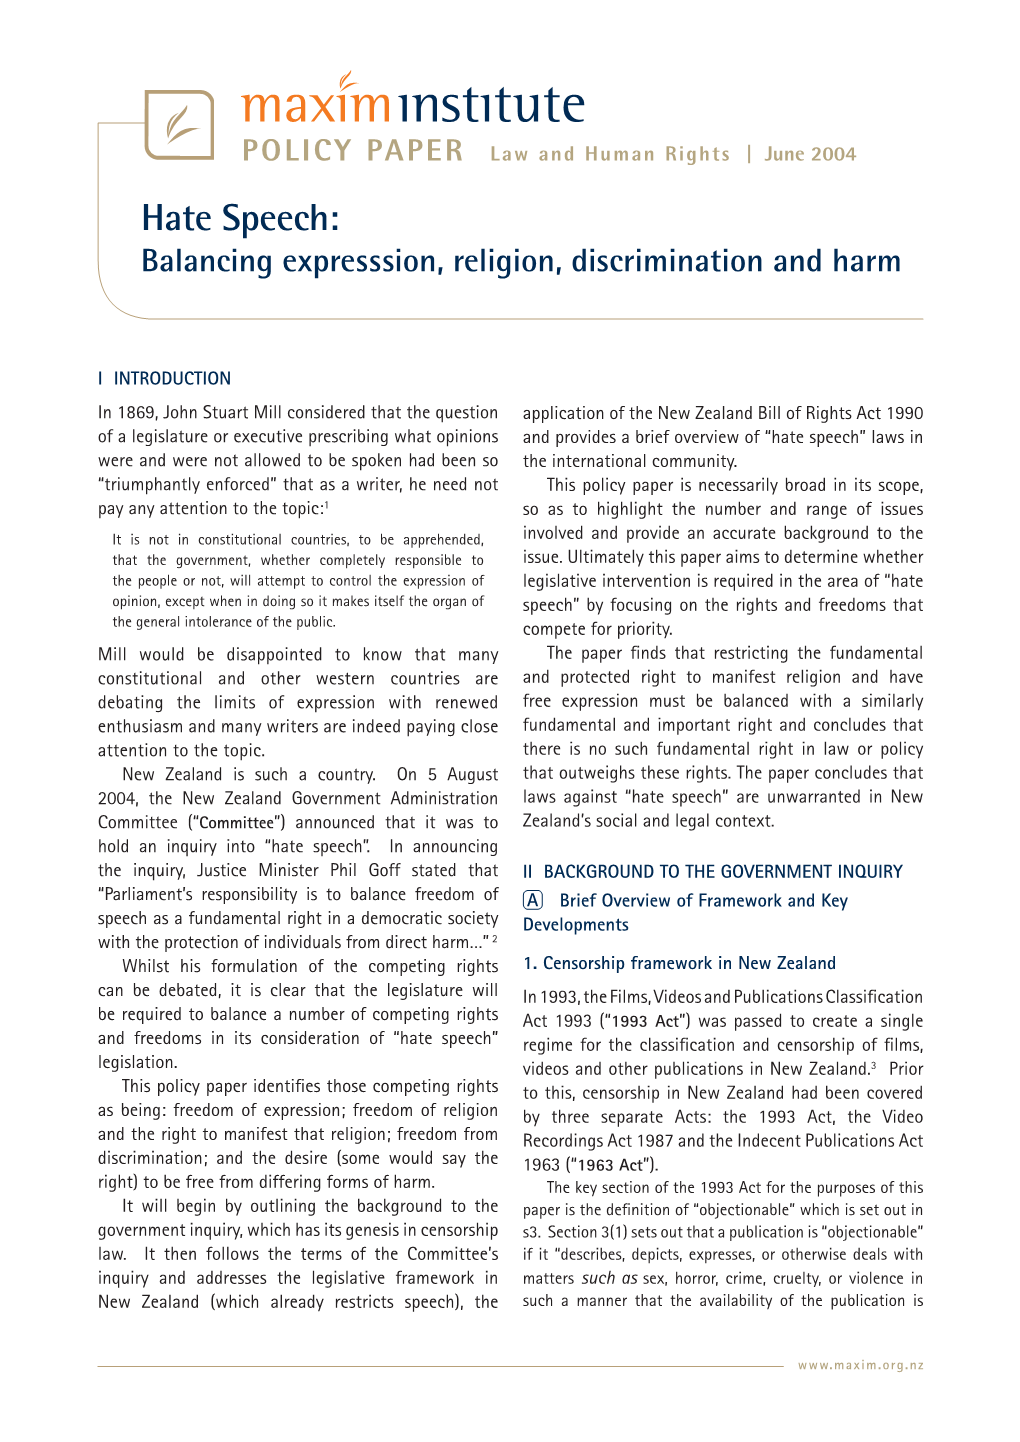 Hate Speech: Balancing Expresssion, Religion, Discrimination and Harm